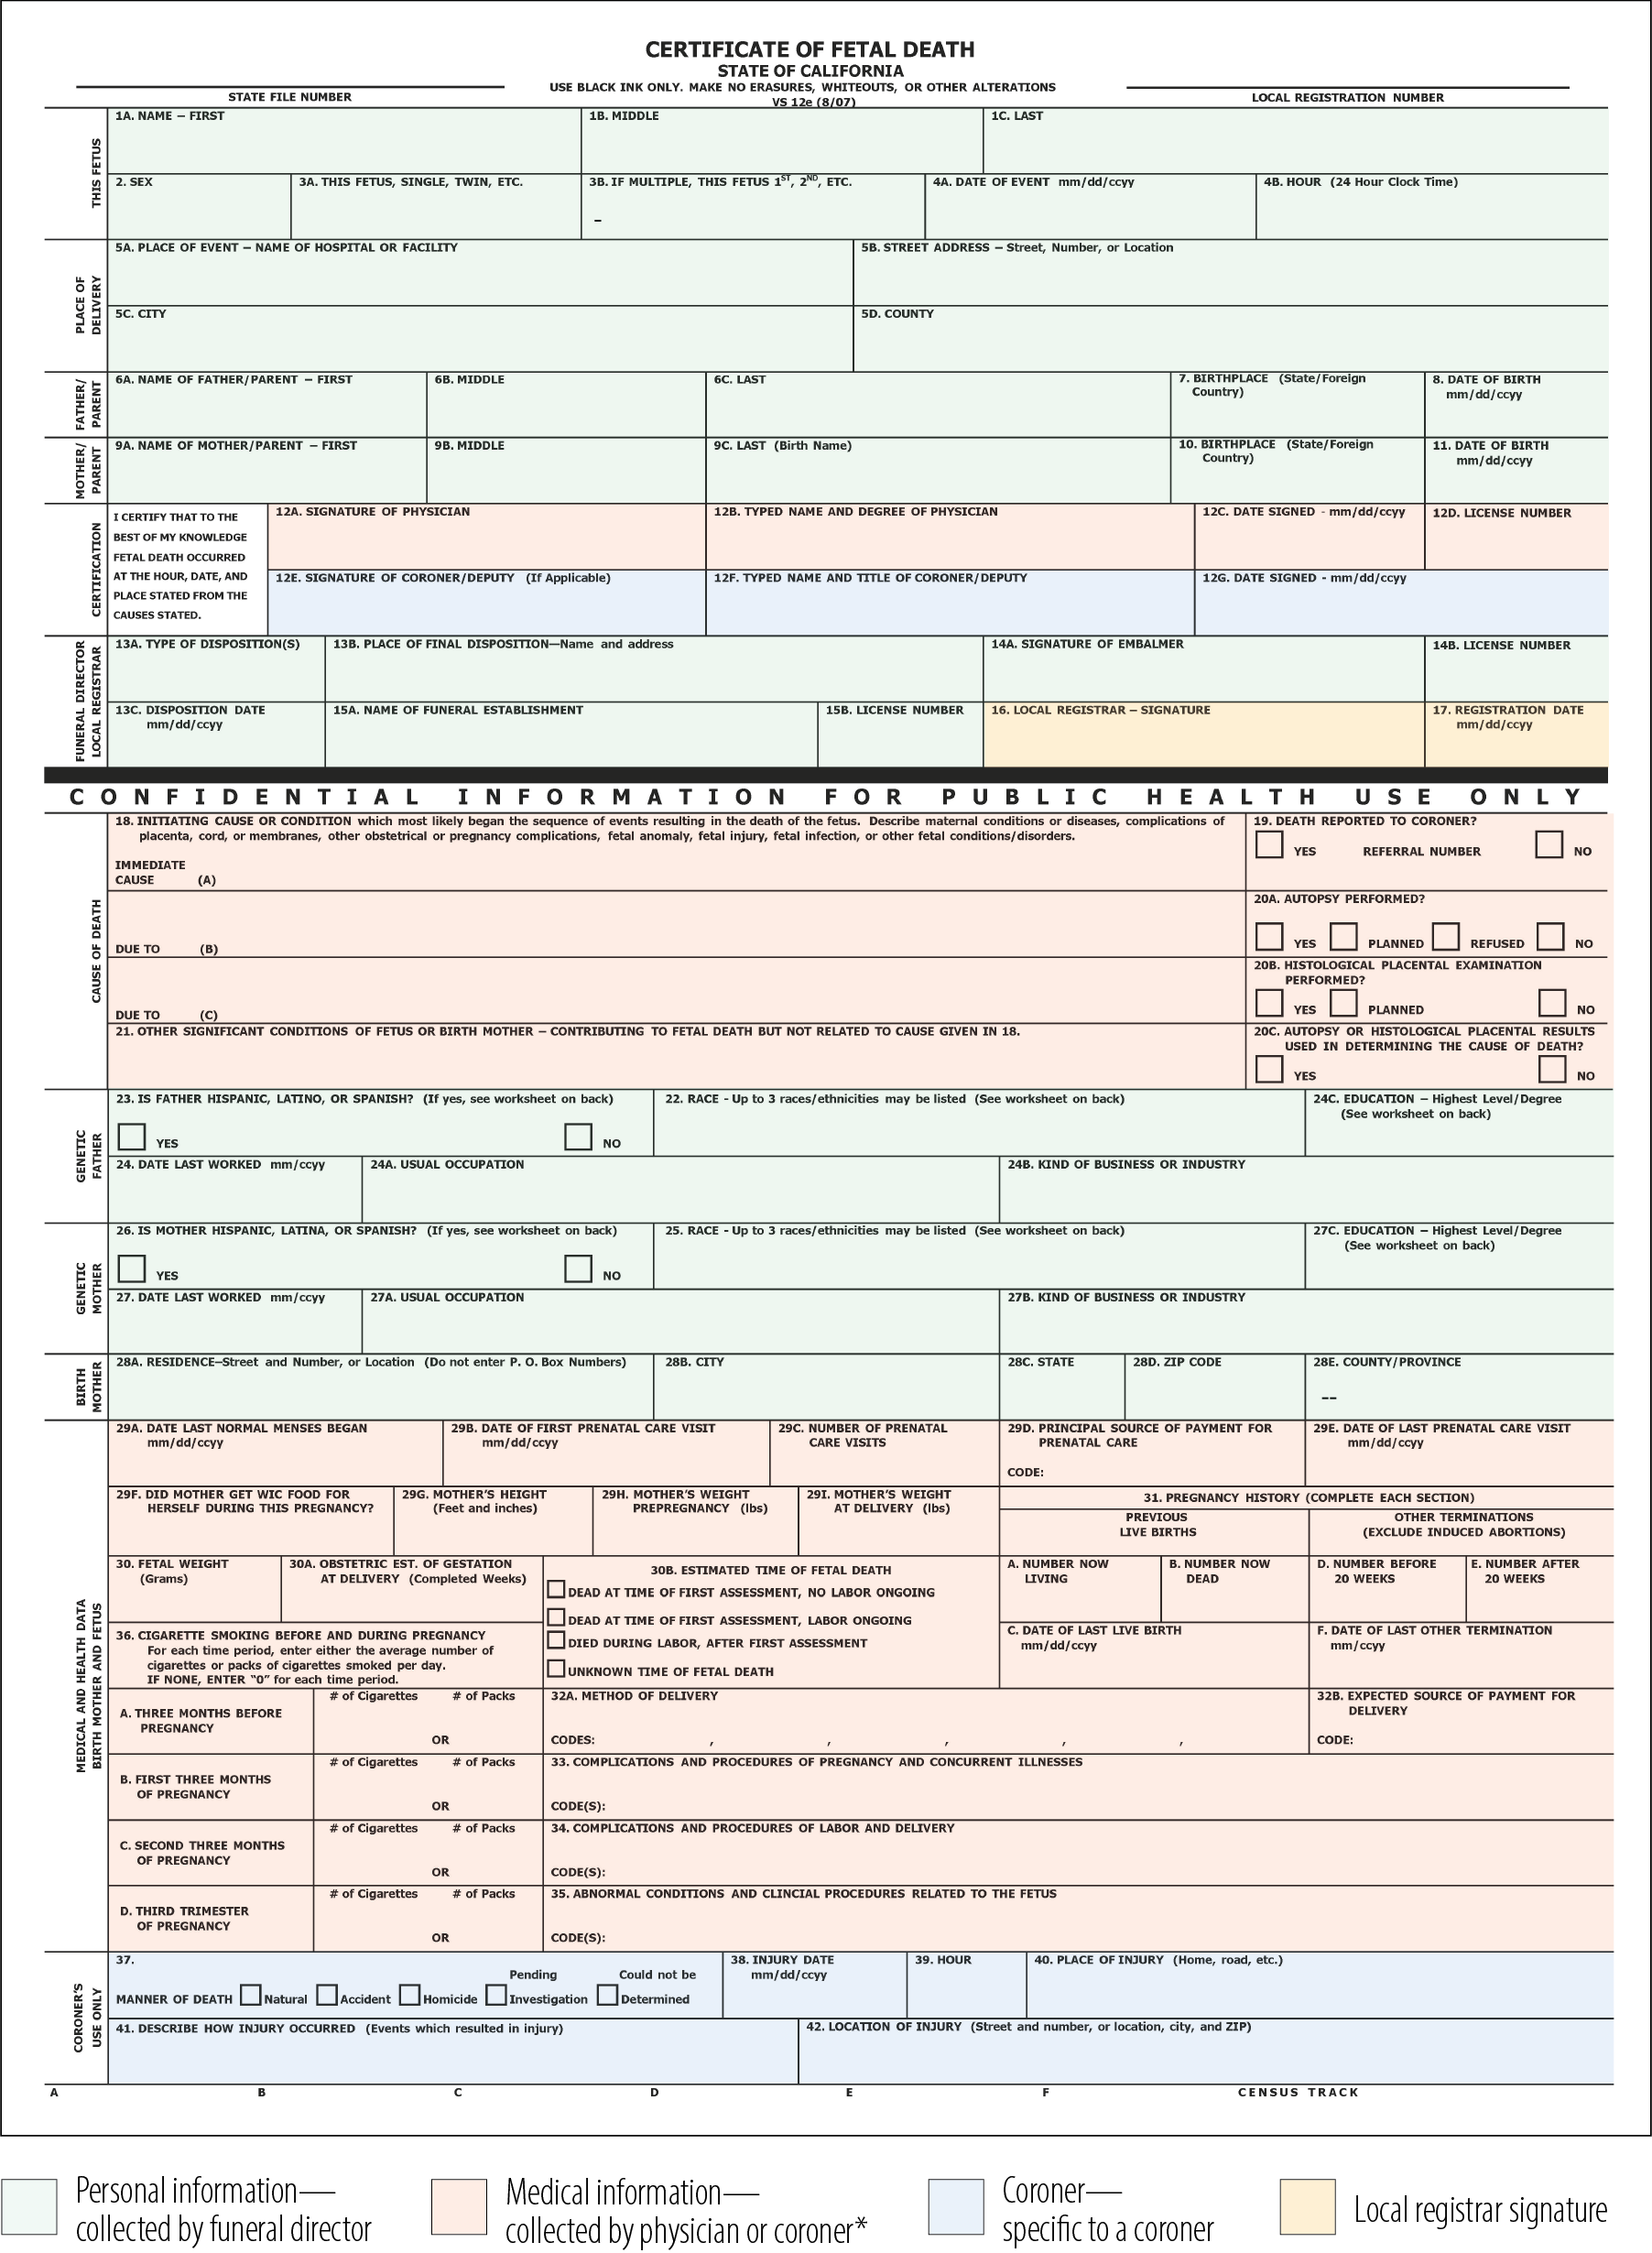 An image of a blank fetal death certificate used by the state to register fetal deaths, with various sections of the certificate shaded to indicate which party is responsible for completing those sections.